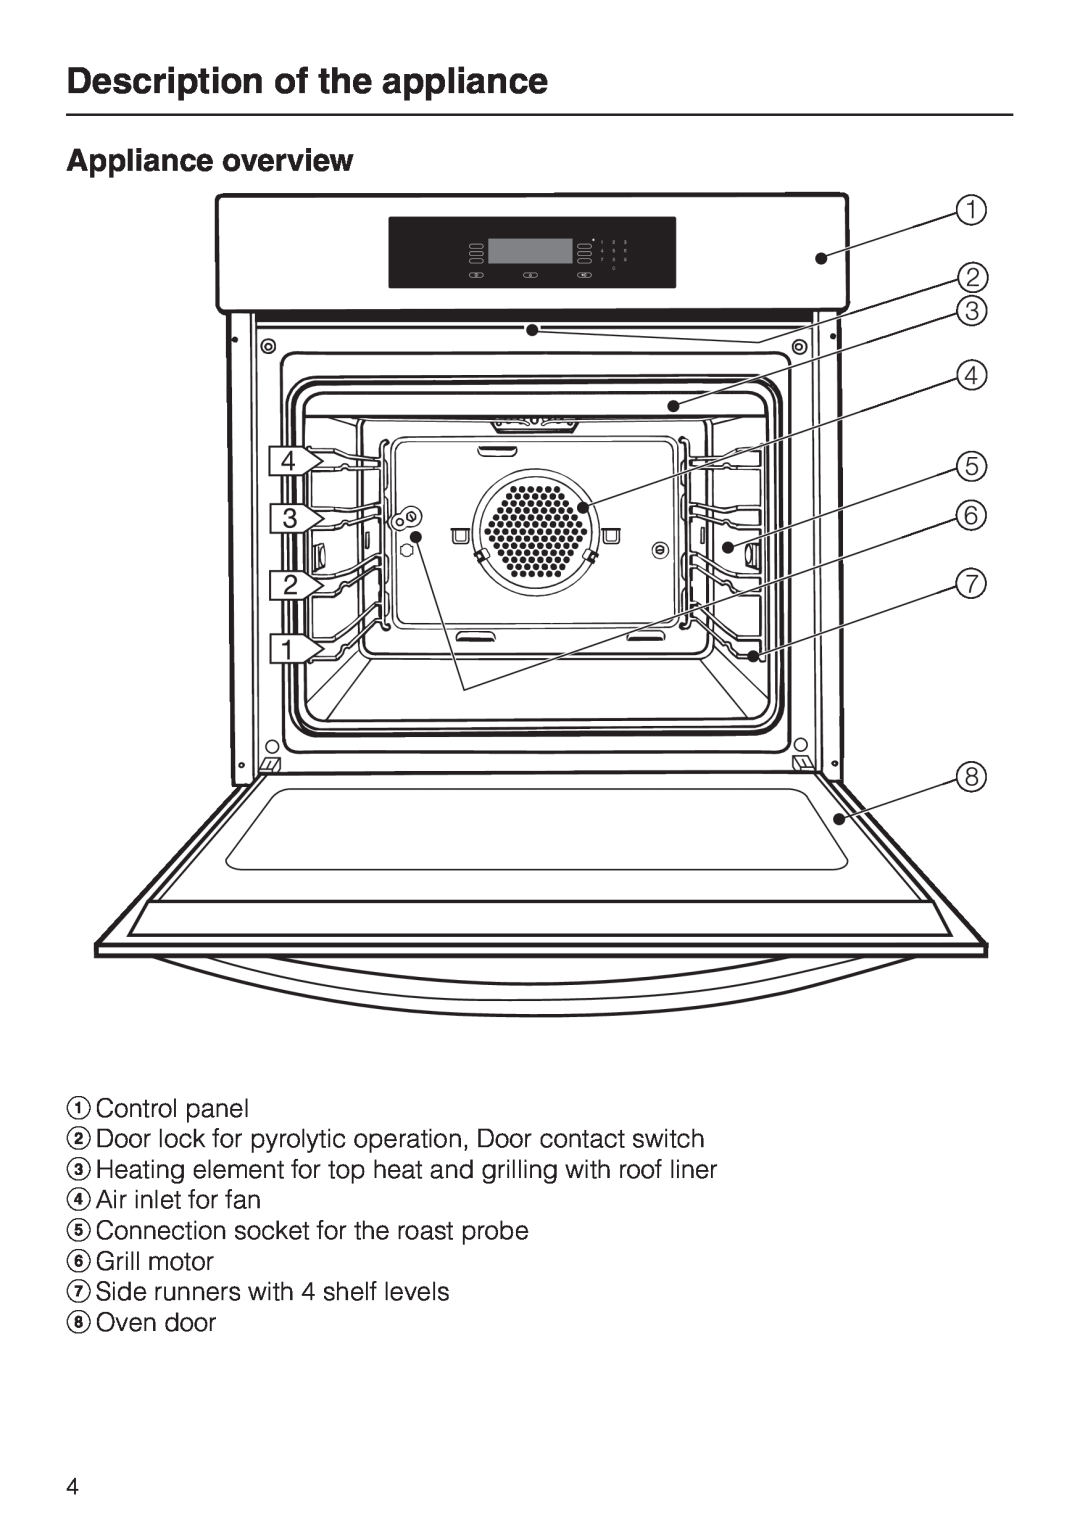 Miele H 4681 installation instructions Description of the appliance, Appliance overview 